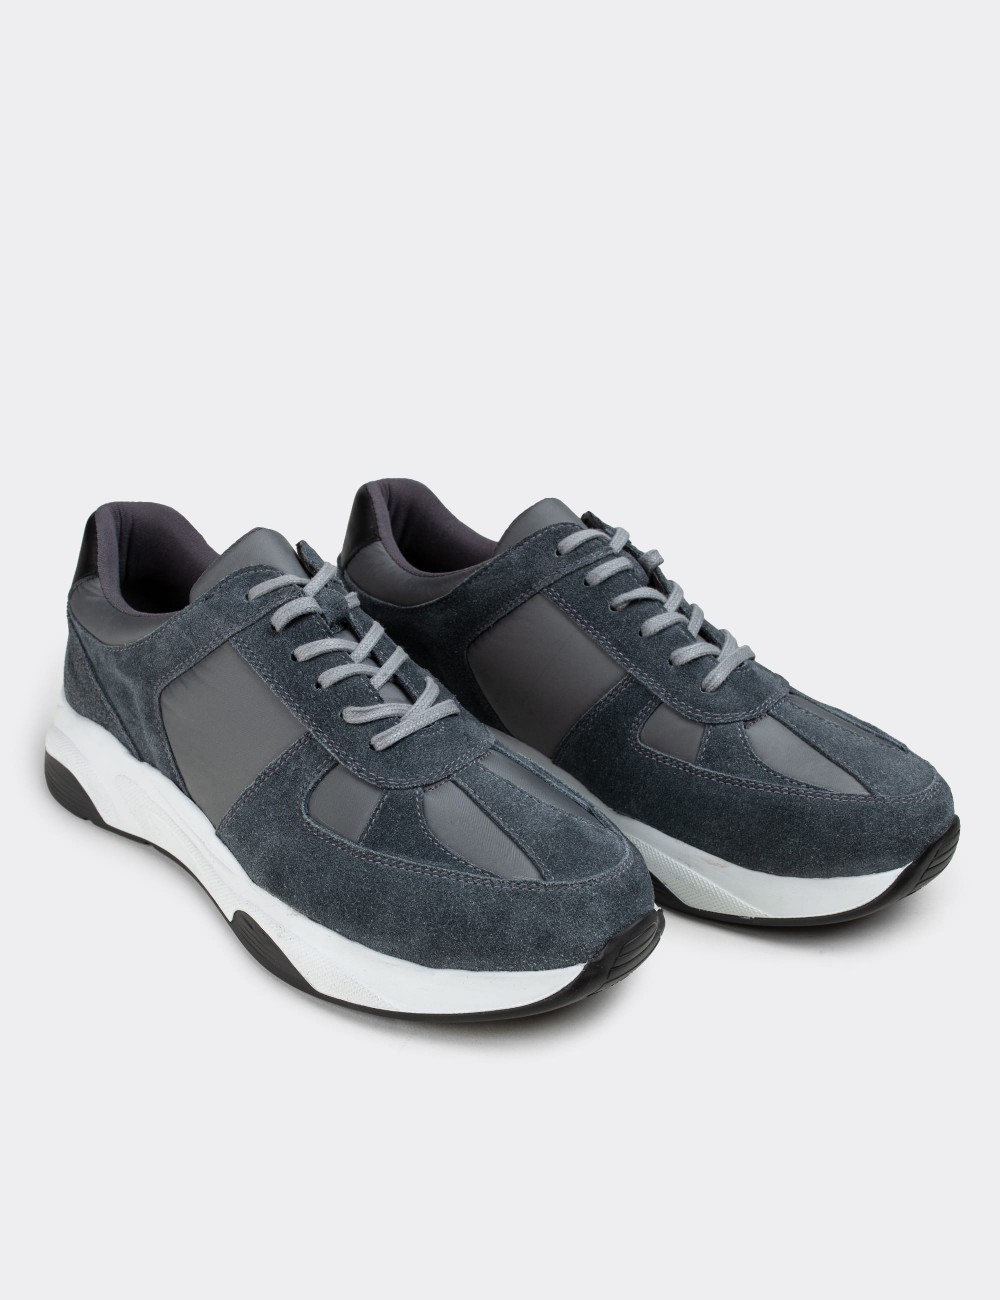 Gray Suede Leather Sneakers - 01821MGRIE01